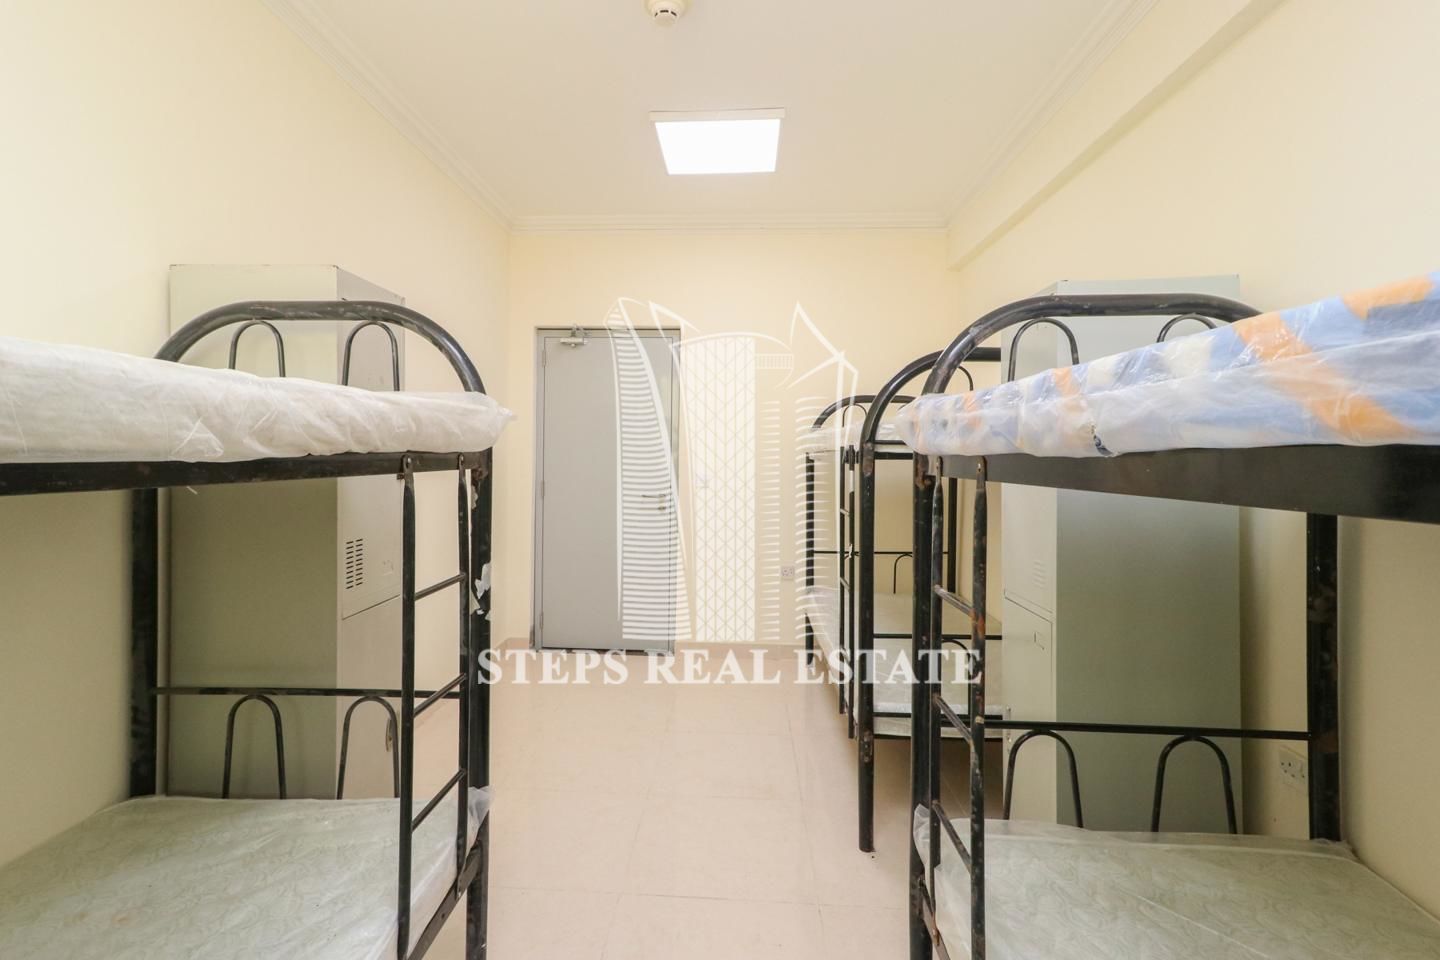 30 Labor Camp Rooms | Bills Included